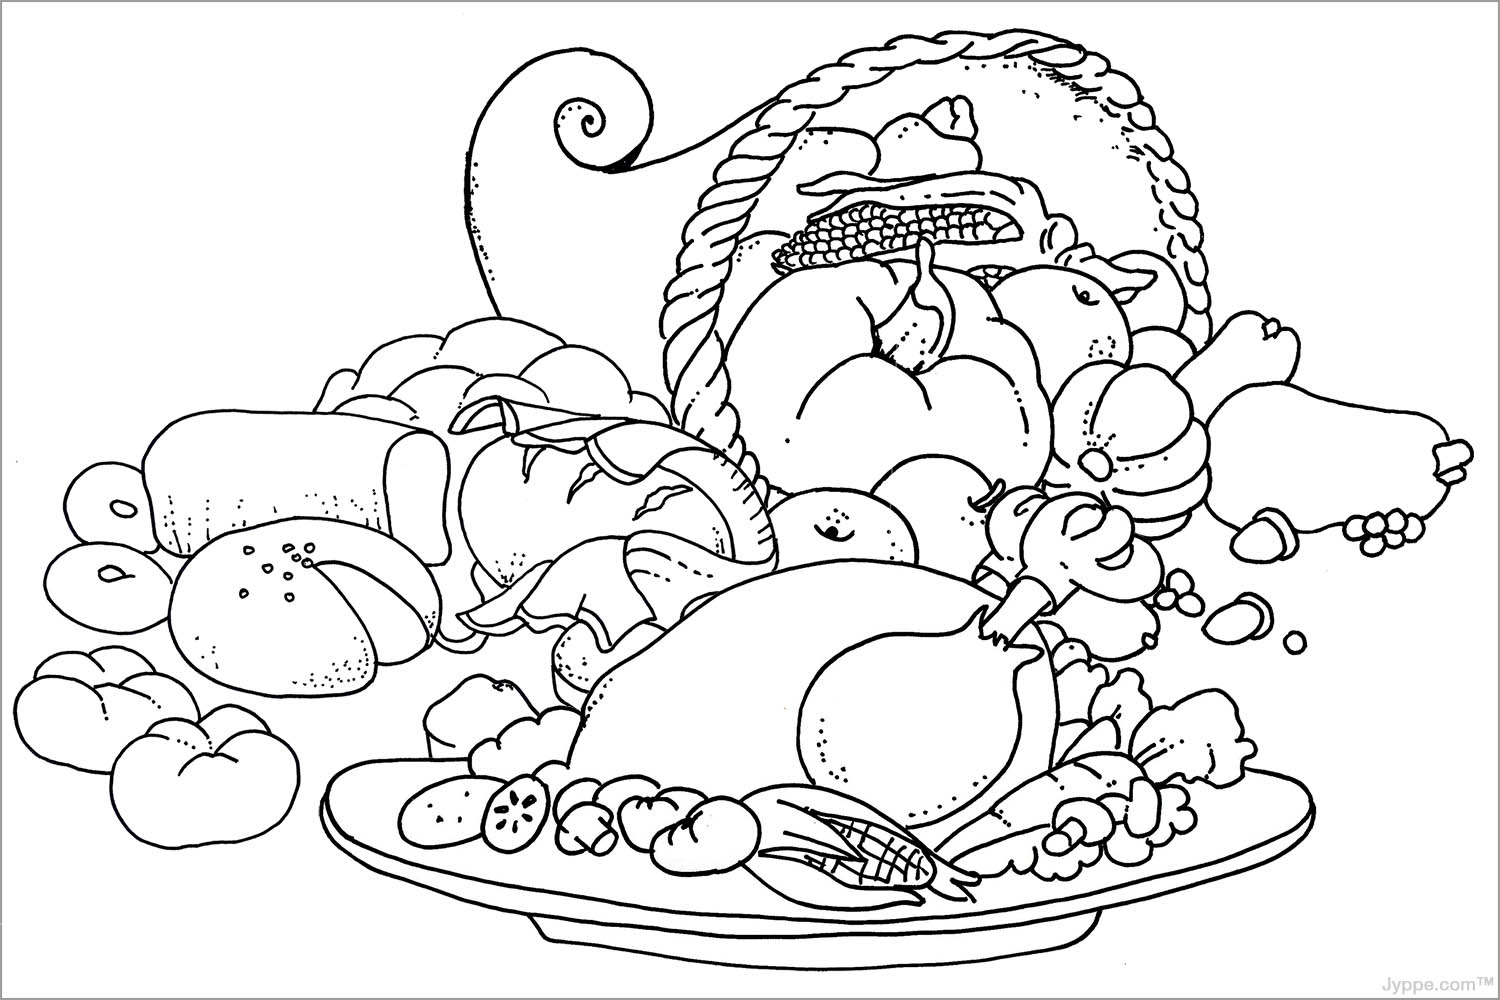 Free Spanish Thanksgiving Coloring Pages - Coloring Page